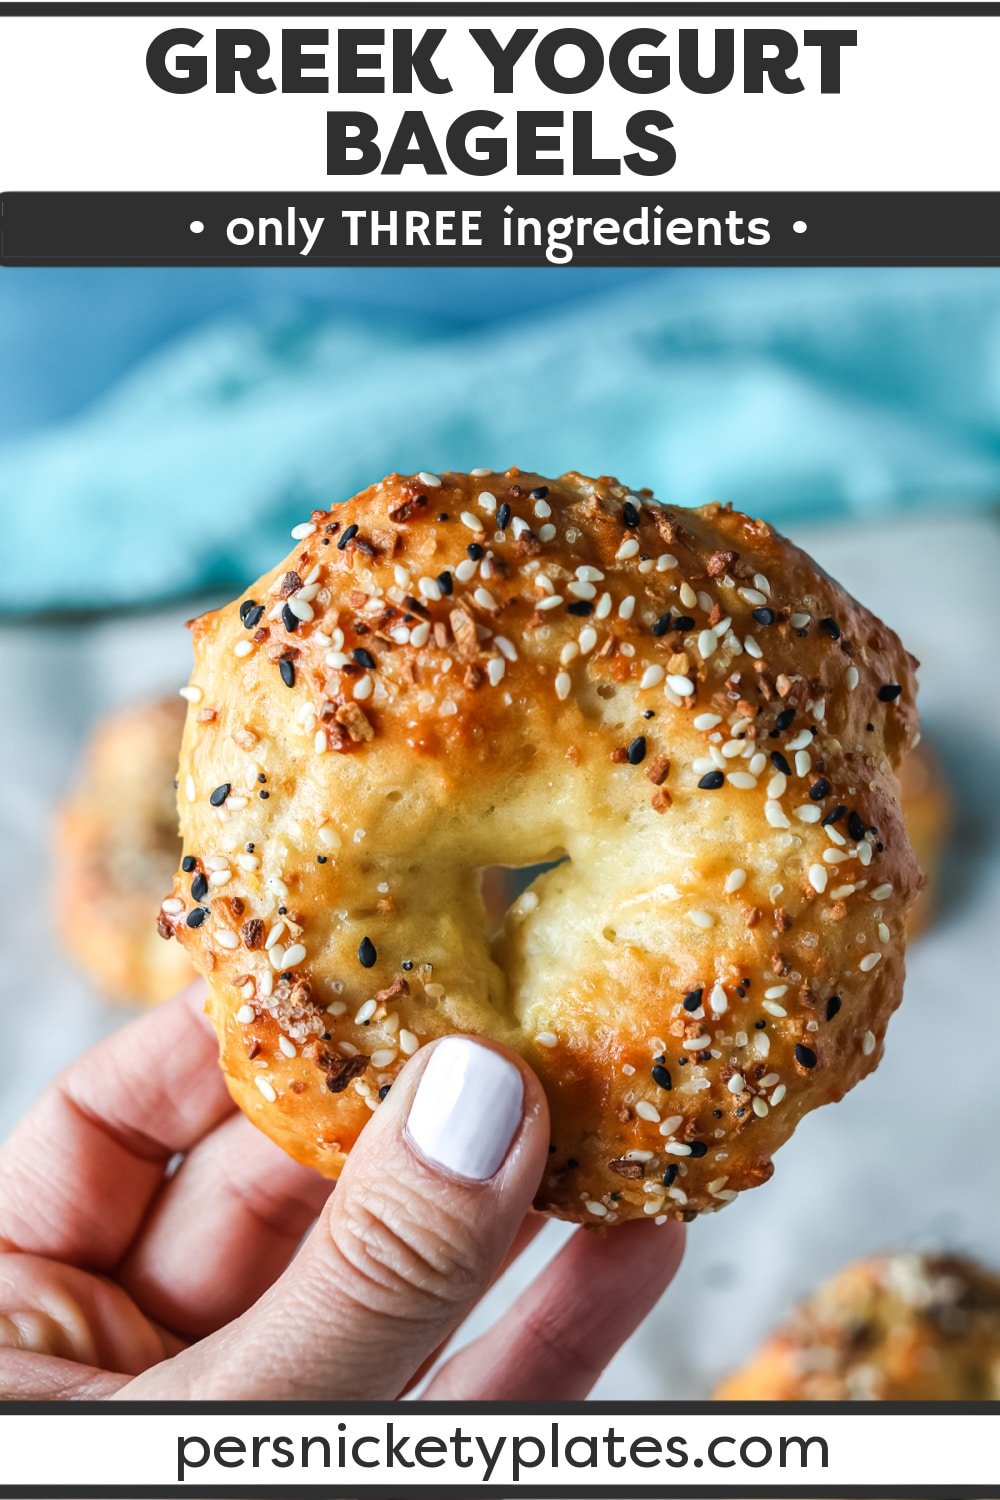 Made with self-rising flour and Greek yogurt, these tasty Greek Yogurt Bagels are so easy to whip up in just 45 minutes! These are made with no yeast, no proofing, no water bath, and no electric mixer. They couldn't be easier, so if you've ever wanted fresh, homemade bagels first thing in the morning, here is your chance! | www.persnicketyplates.com